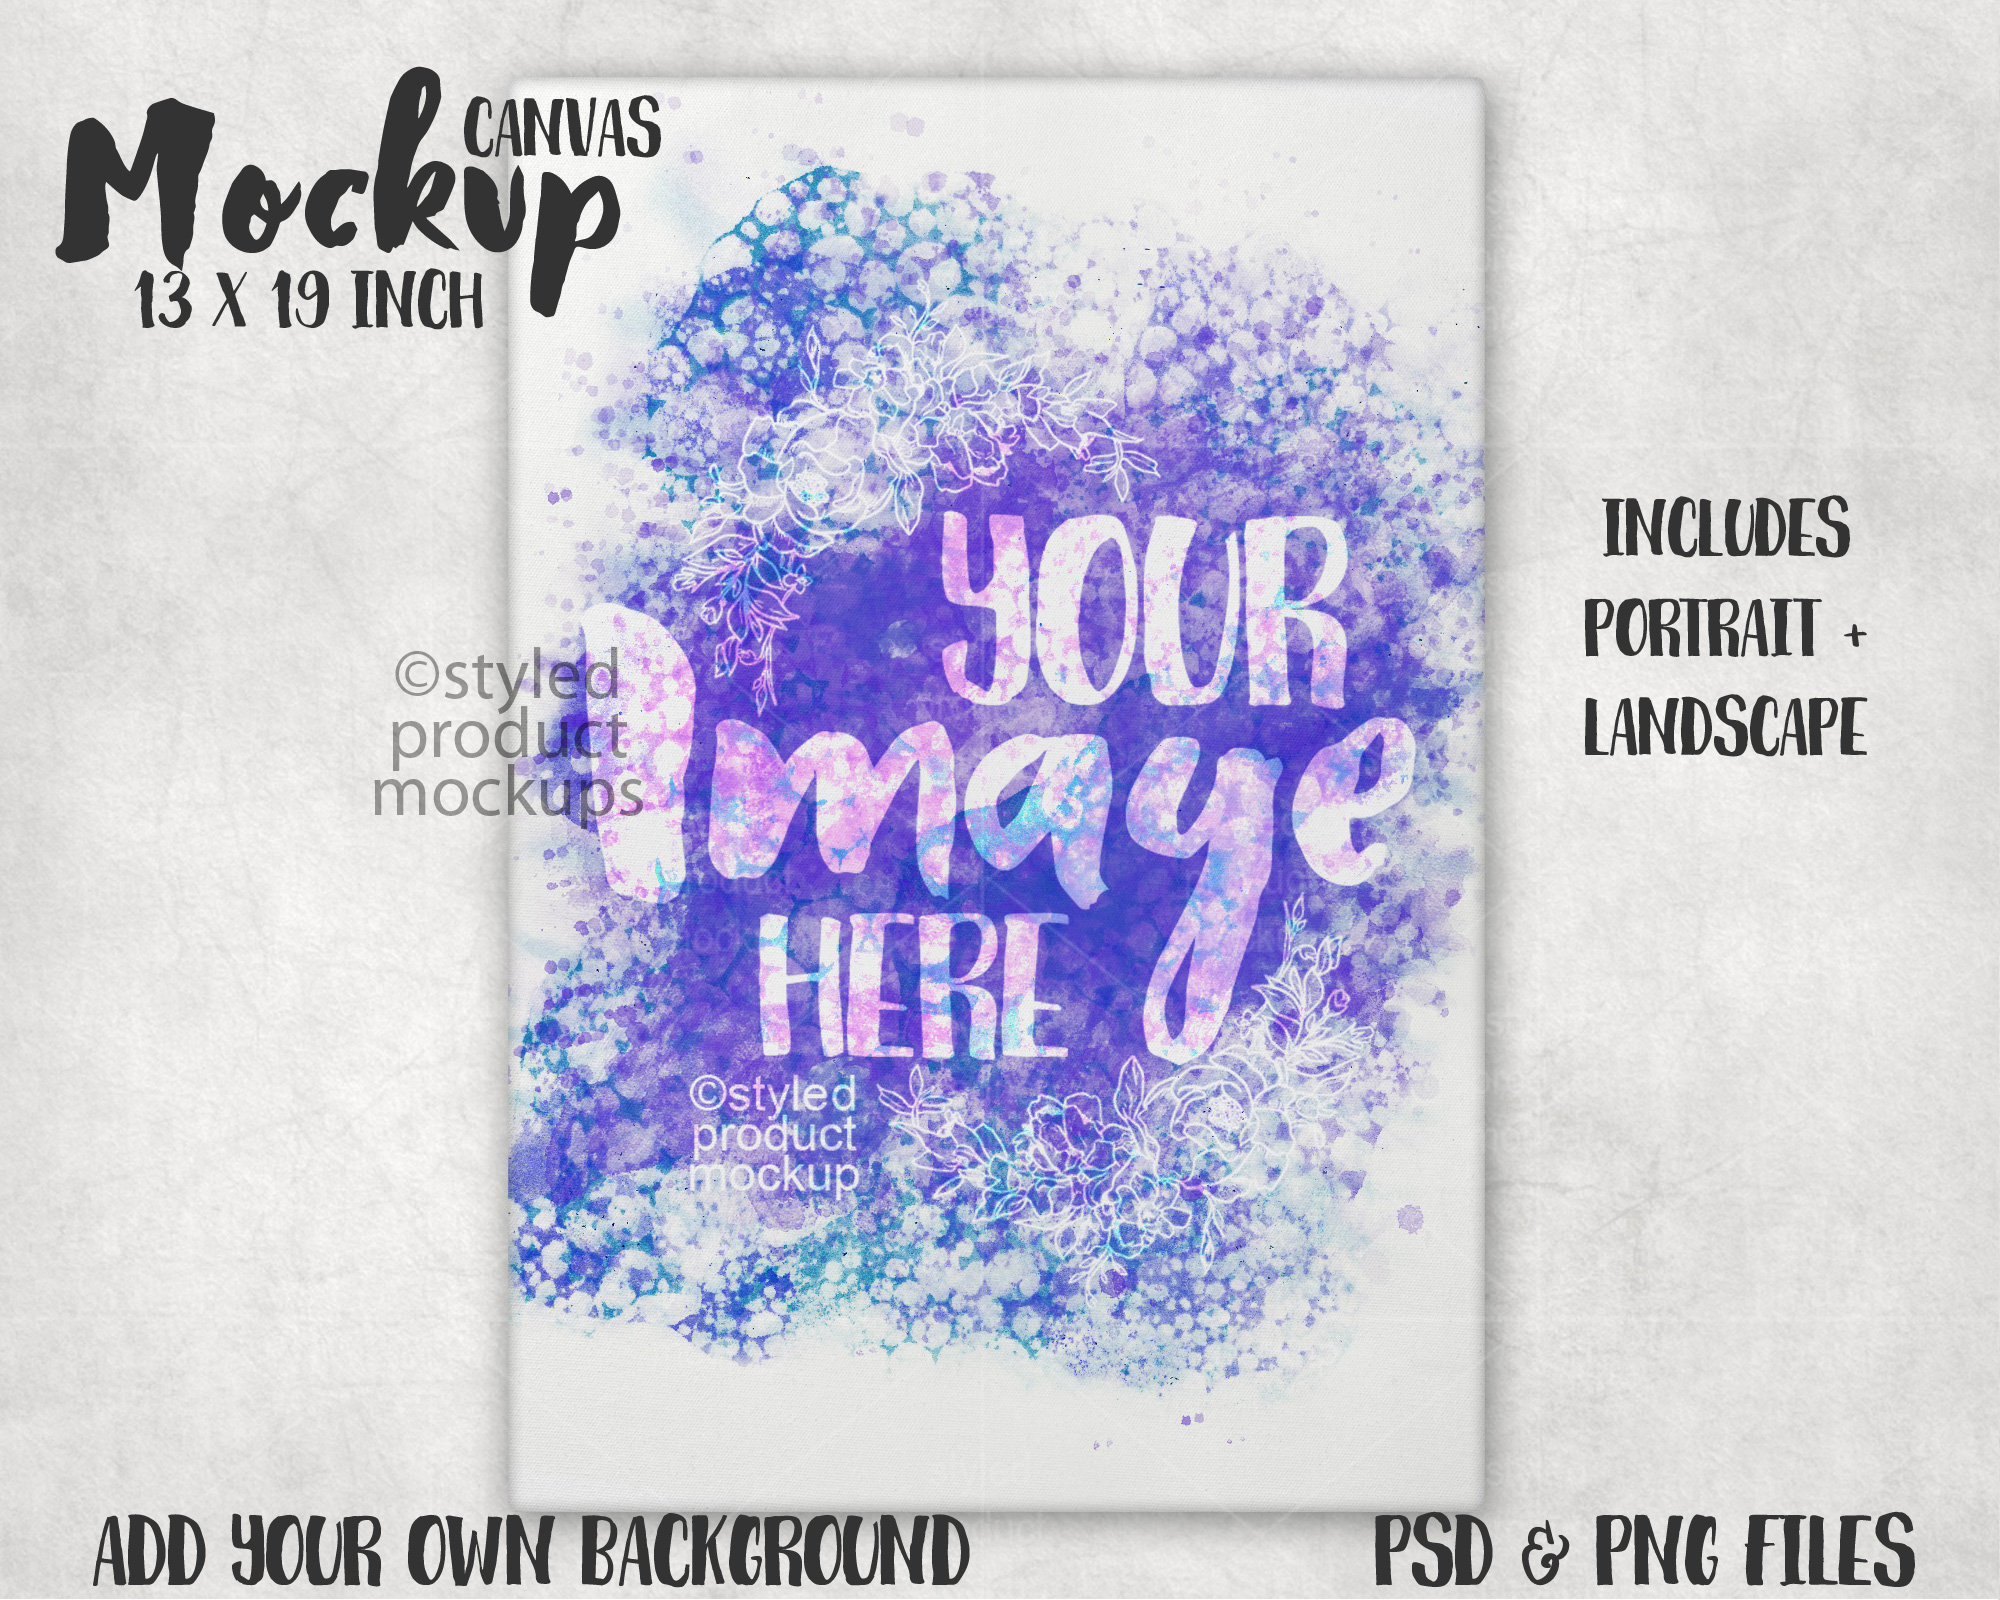 Dye Sublimation 13x19 Canvas Art Print Mockup Add Your Own Image and  Background 